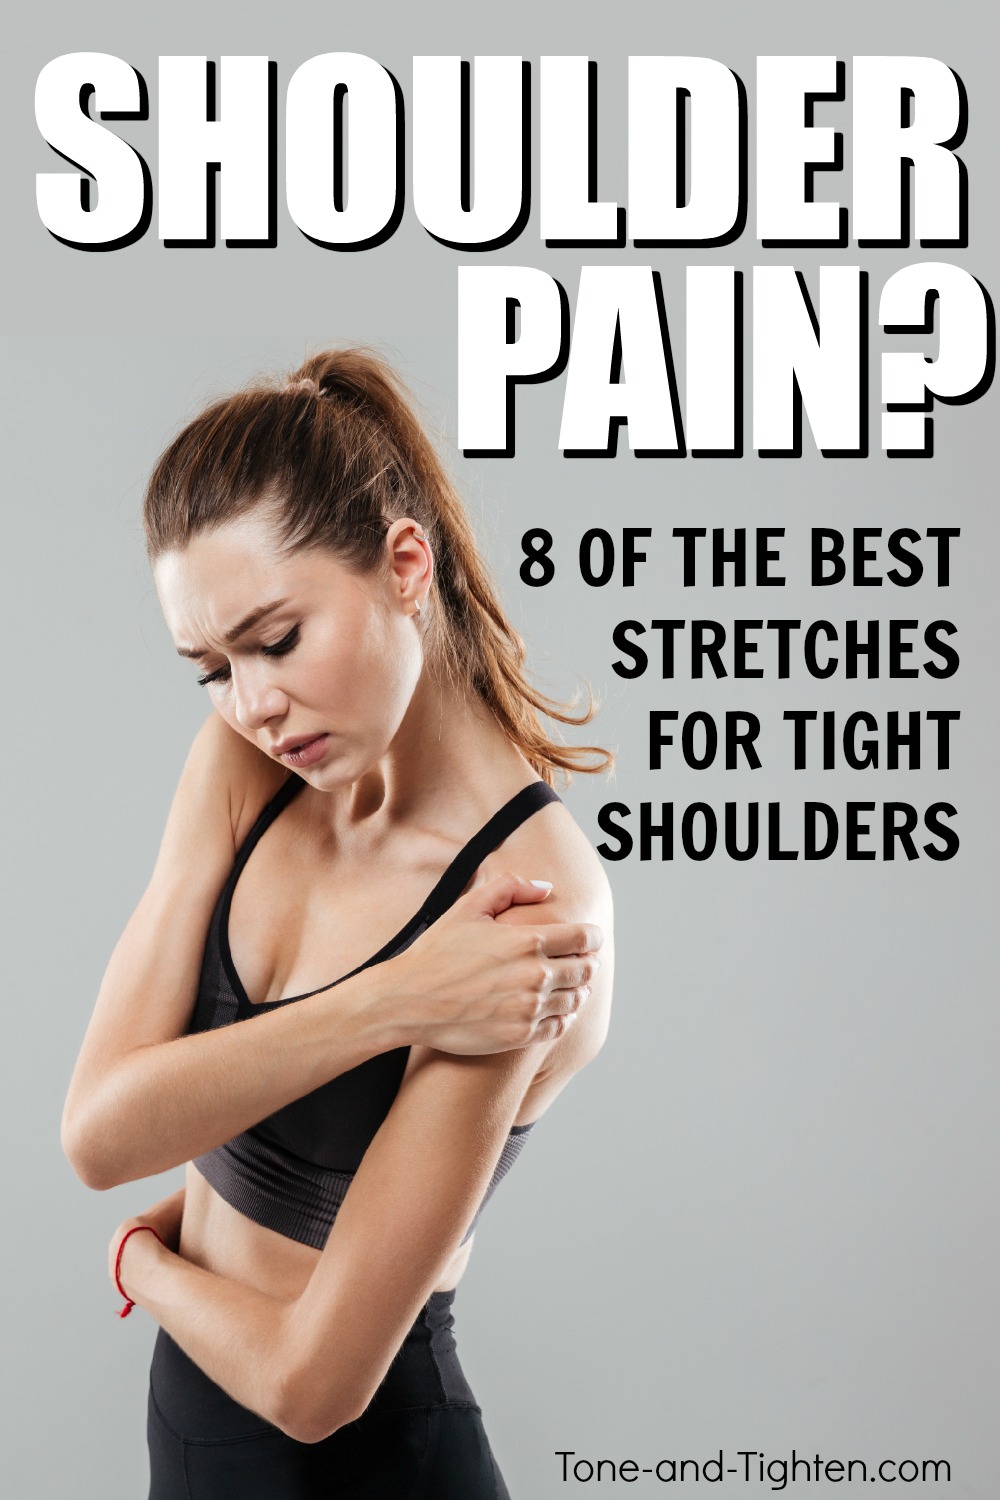 Best Stretches For Shoulder Pain And Mobility – Frozen Shoulder